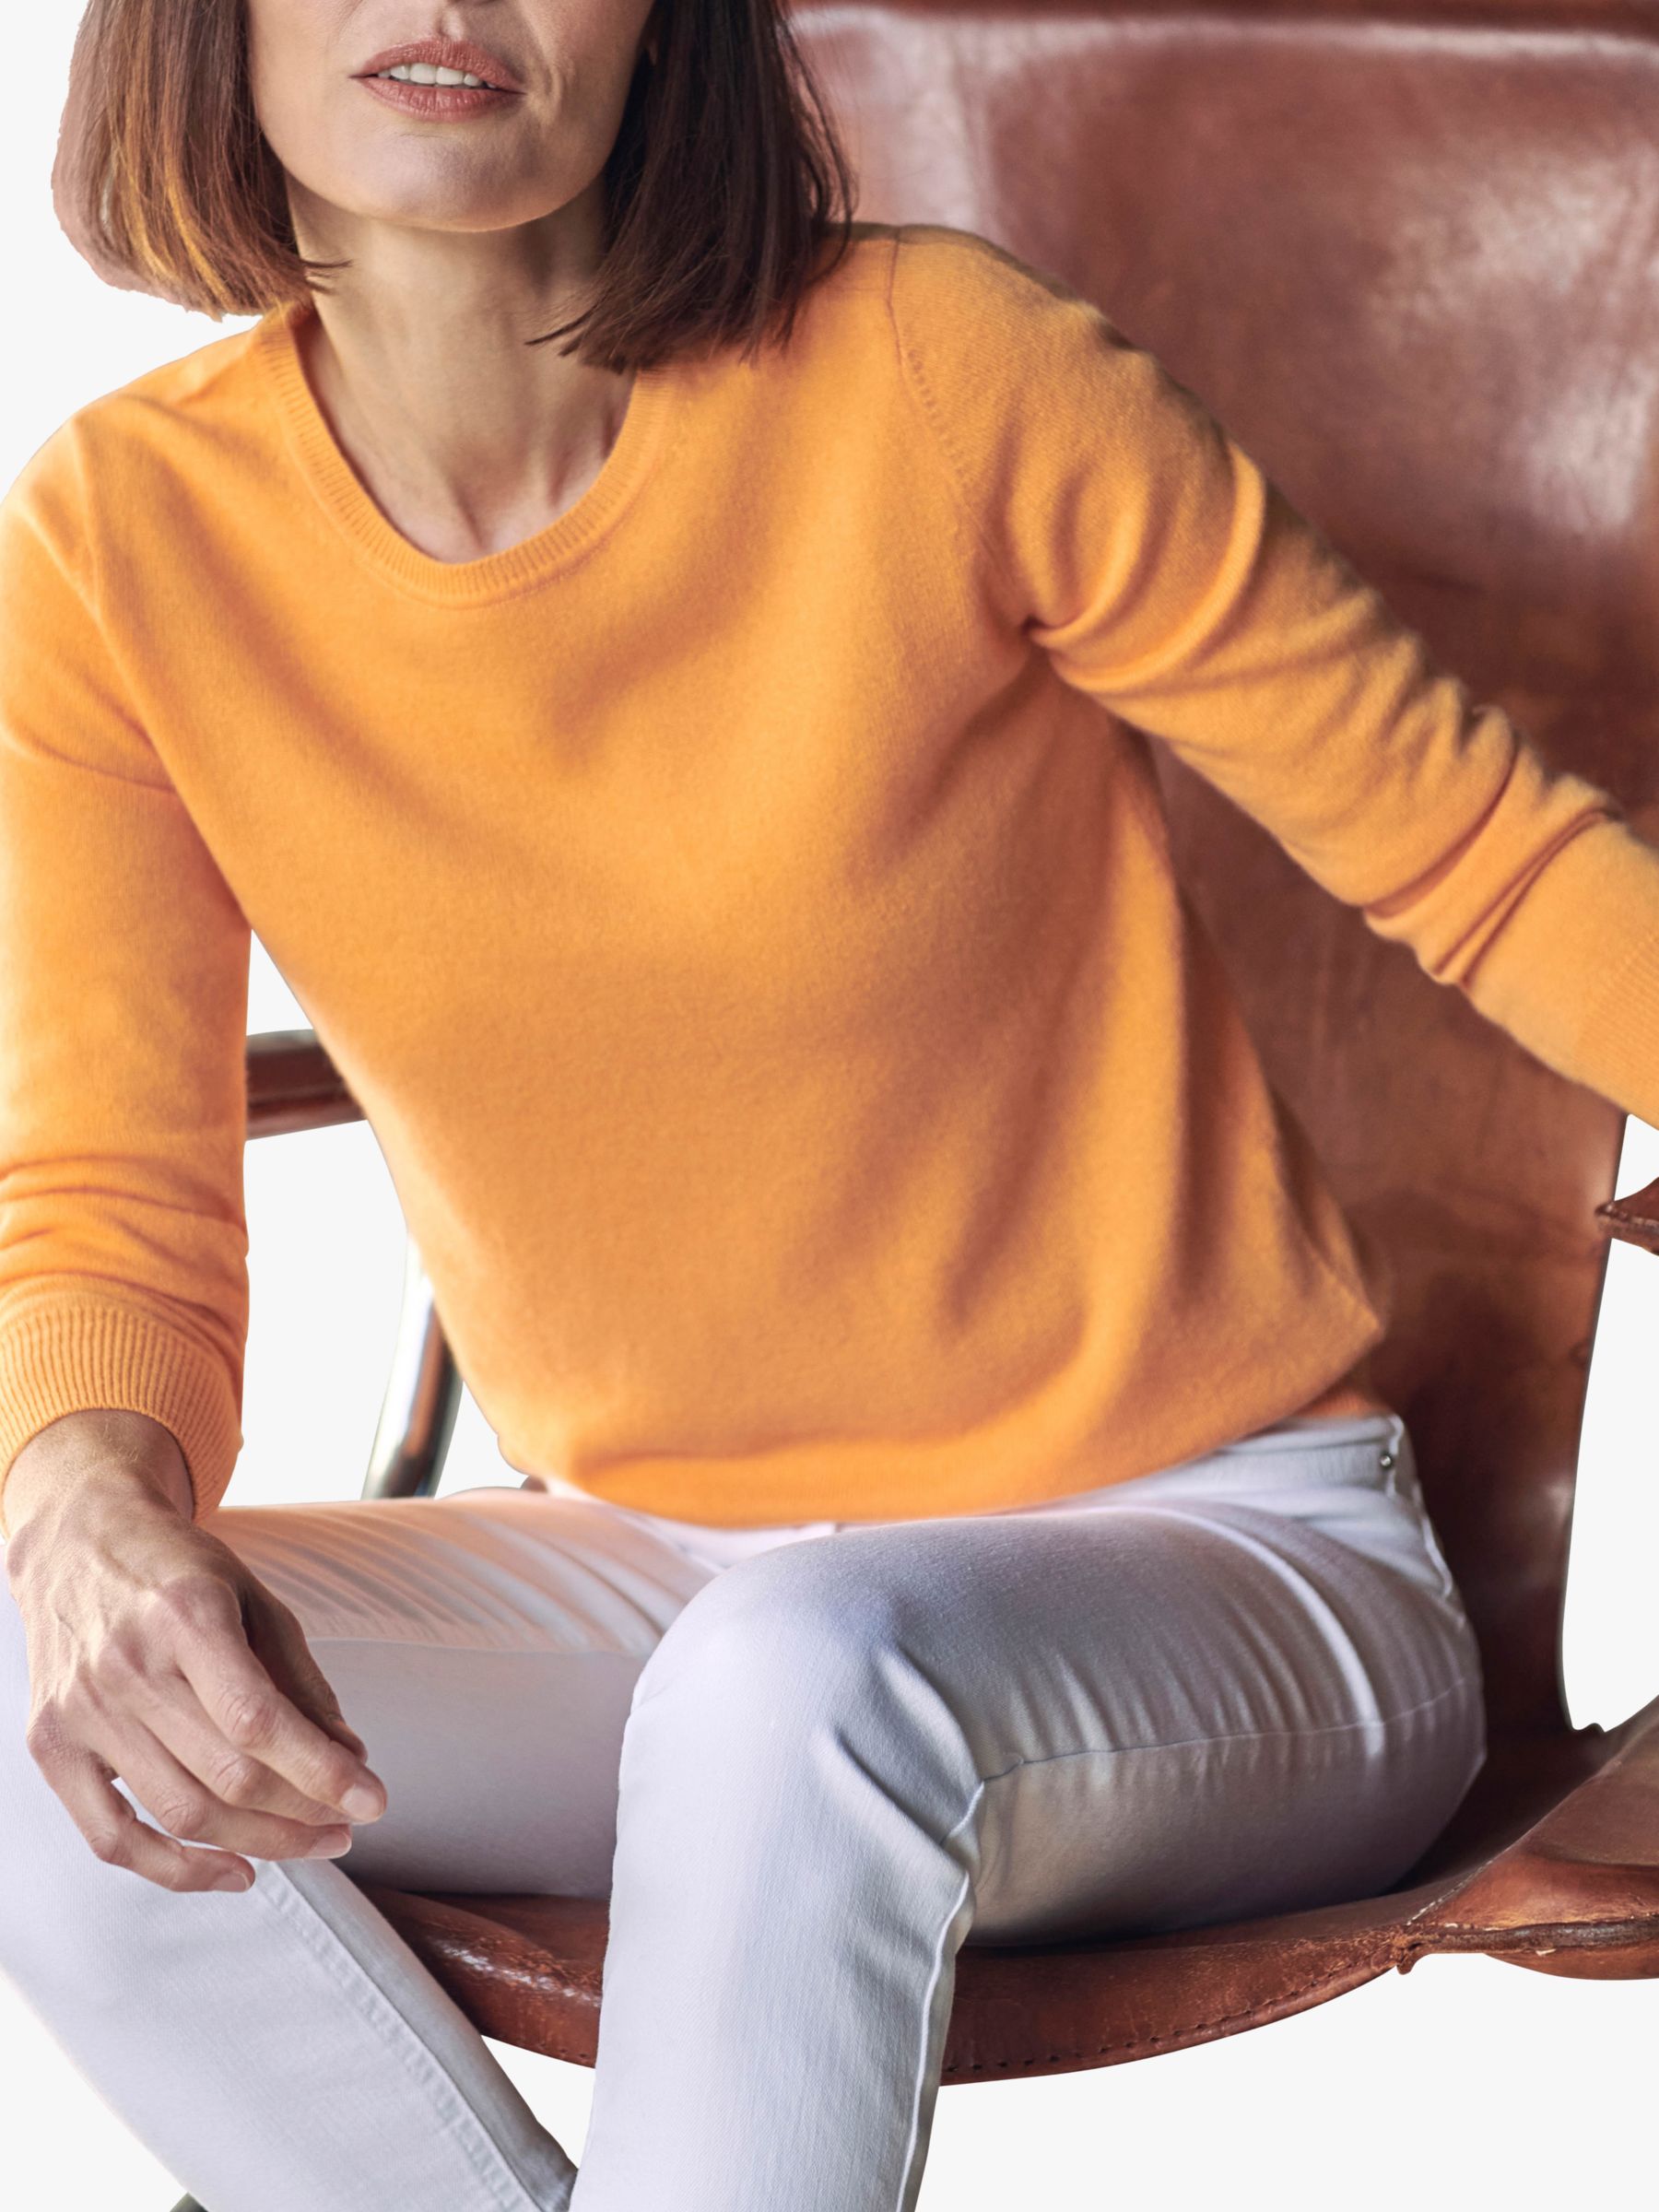 100% Cashmere Comfort Crew Sweater Favorites by Subtle Luxury